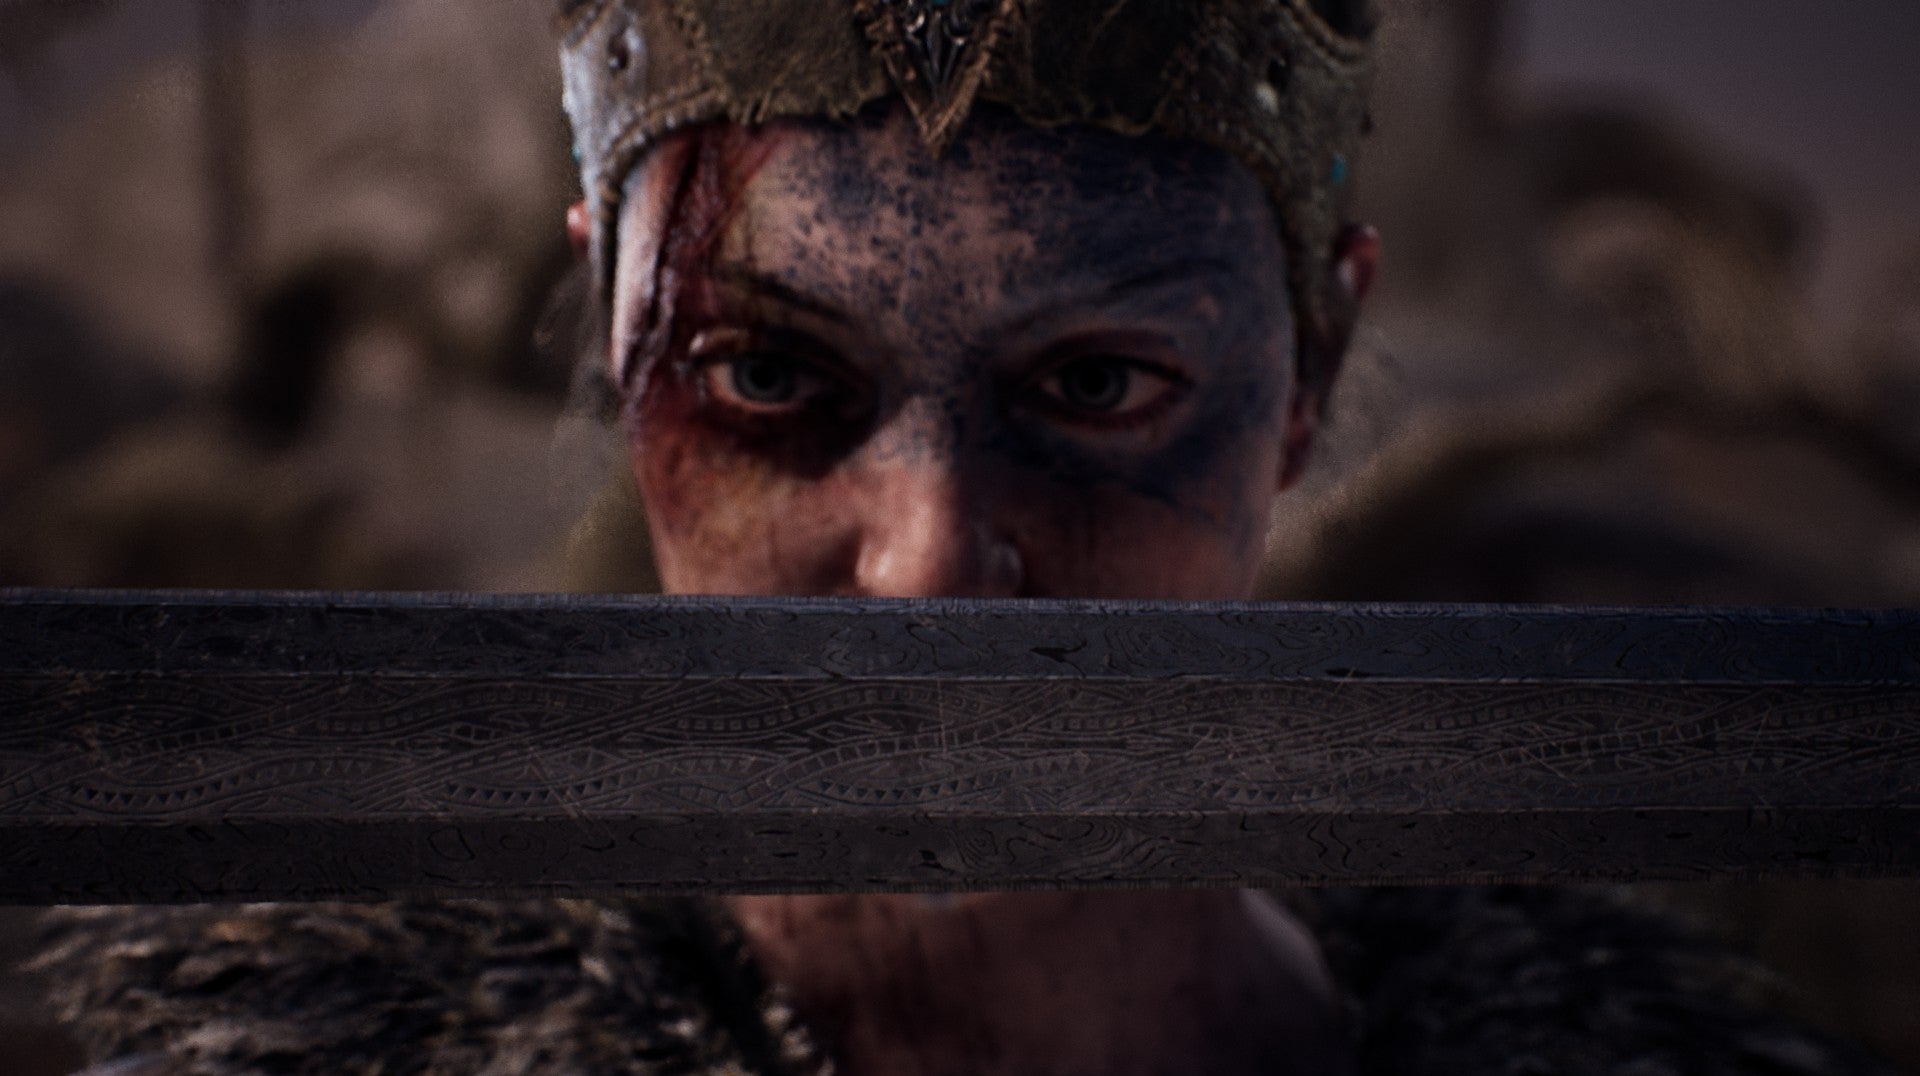 Image for Hellblade was a good depiction of mental illness but games need to be sharper